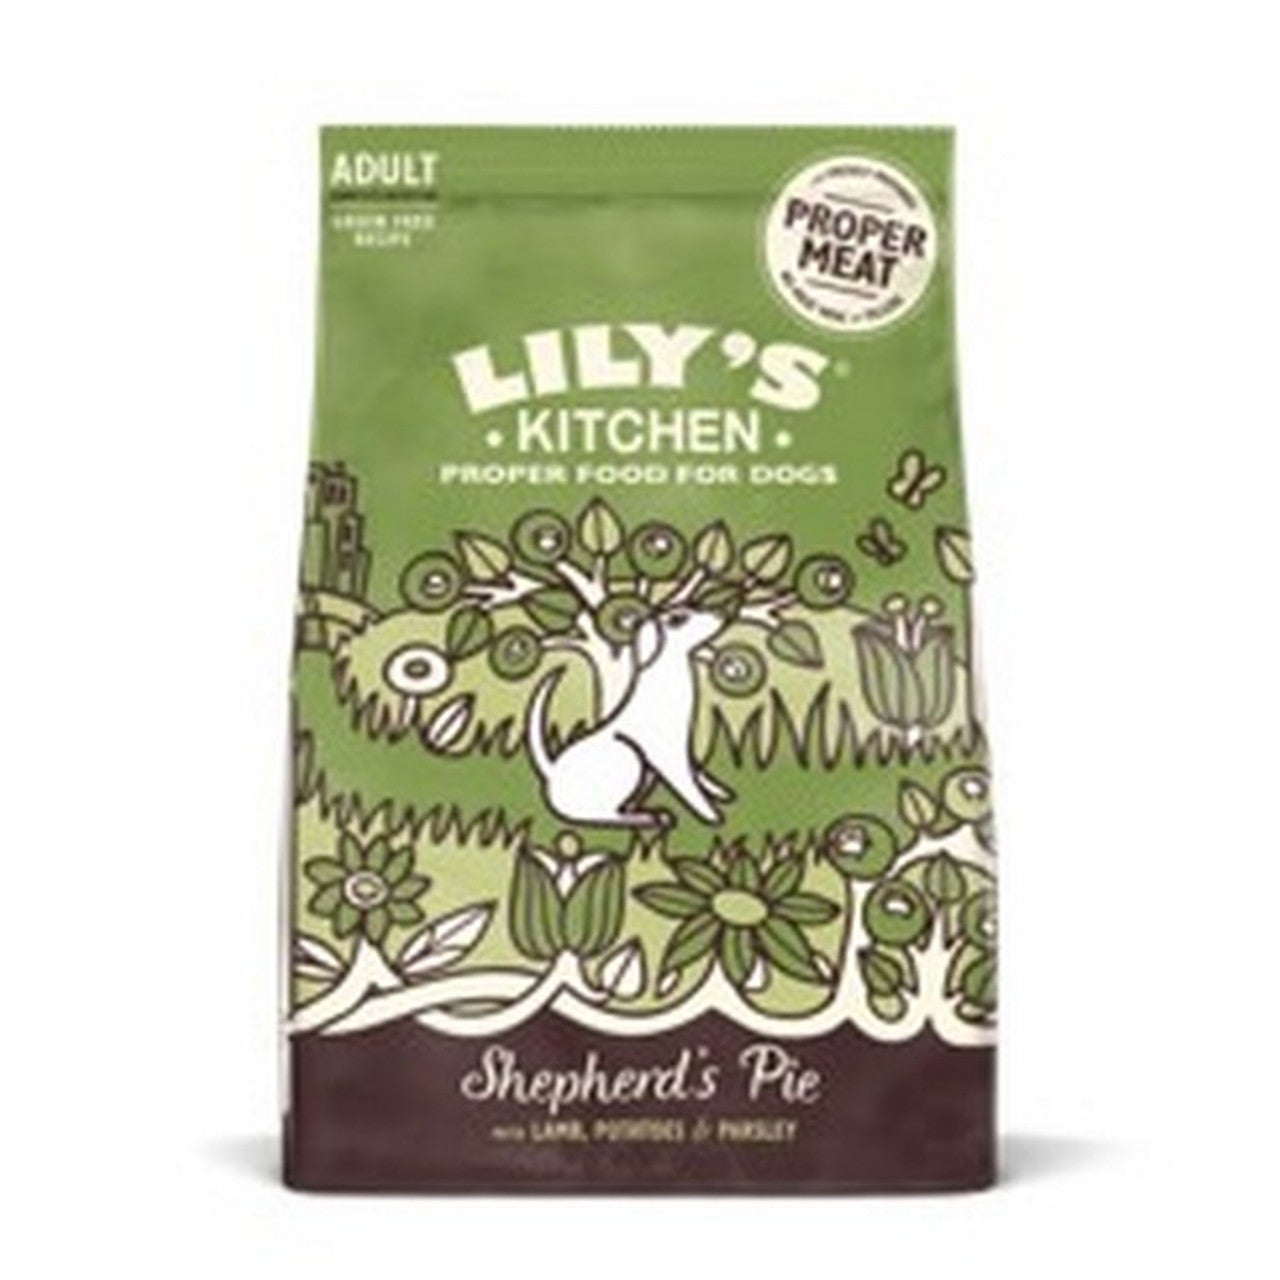 Lilys Kitchen Shepherds Pie with Lamb Potatoes and Parsley Dry Dog Food 7kg